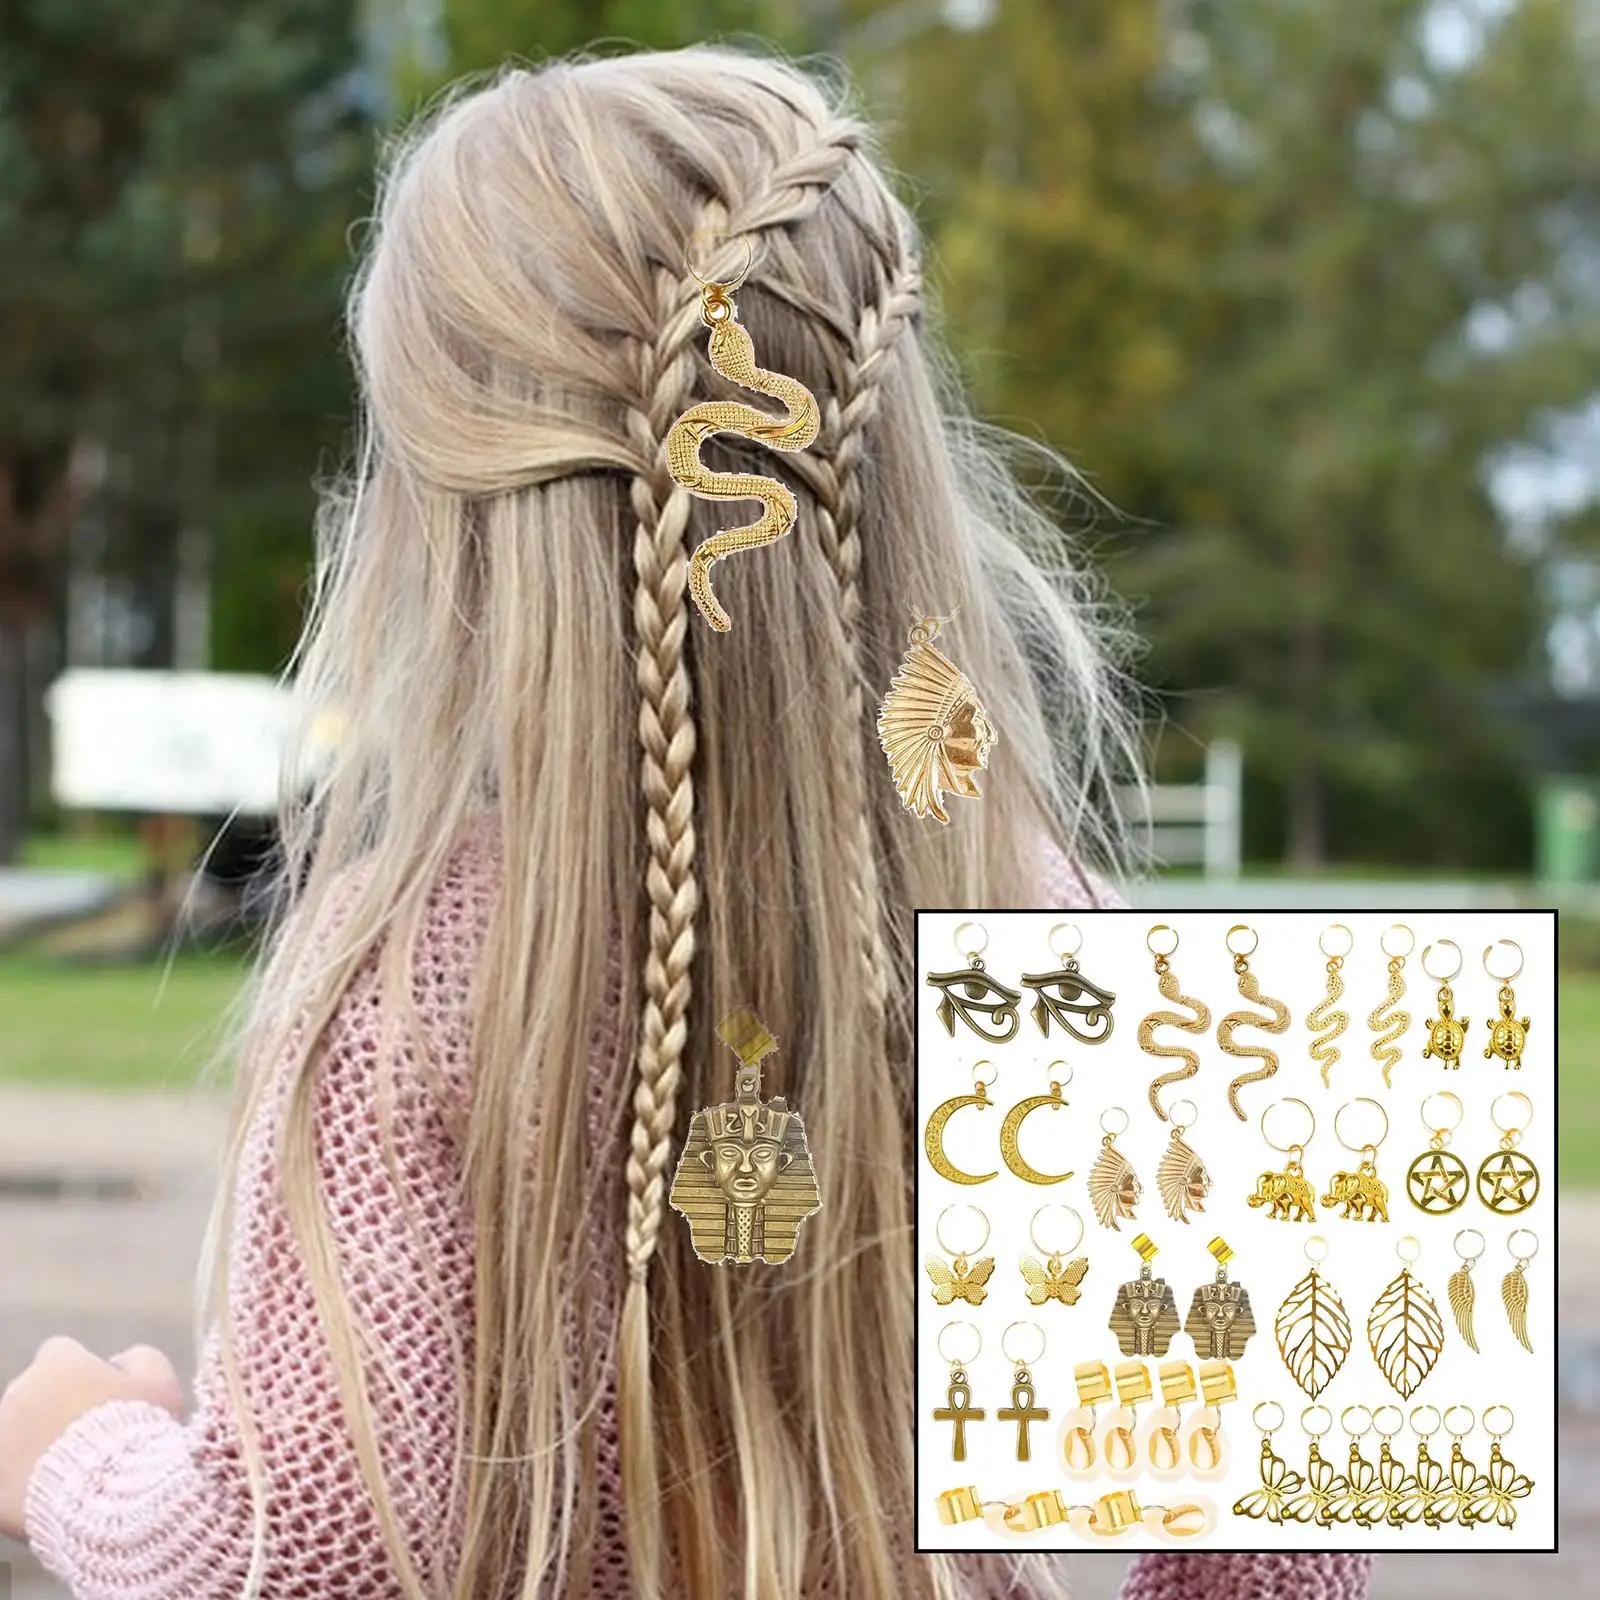 40 Count Jewelry Braids Hair Clips Dreadlocks Hair Charms Reusable Exquisite